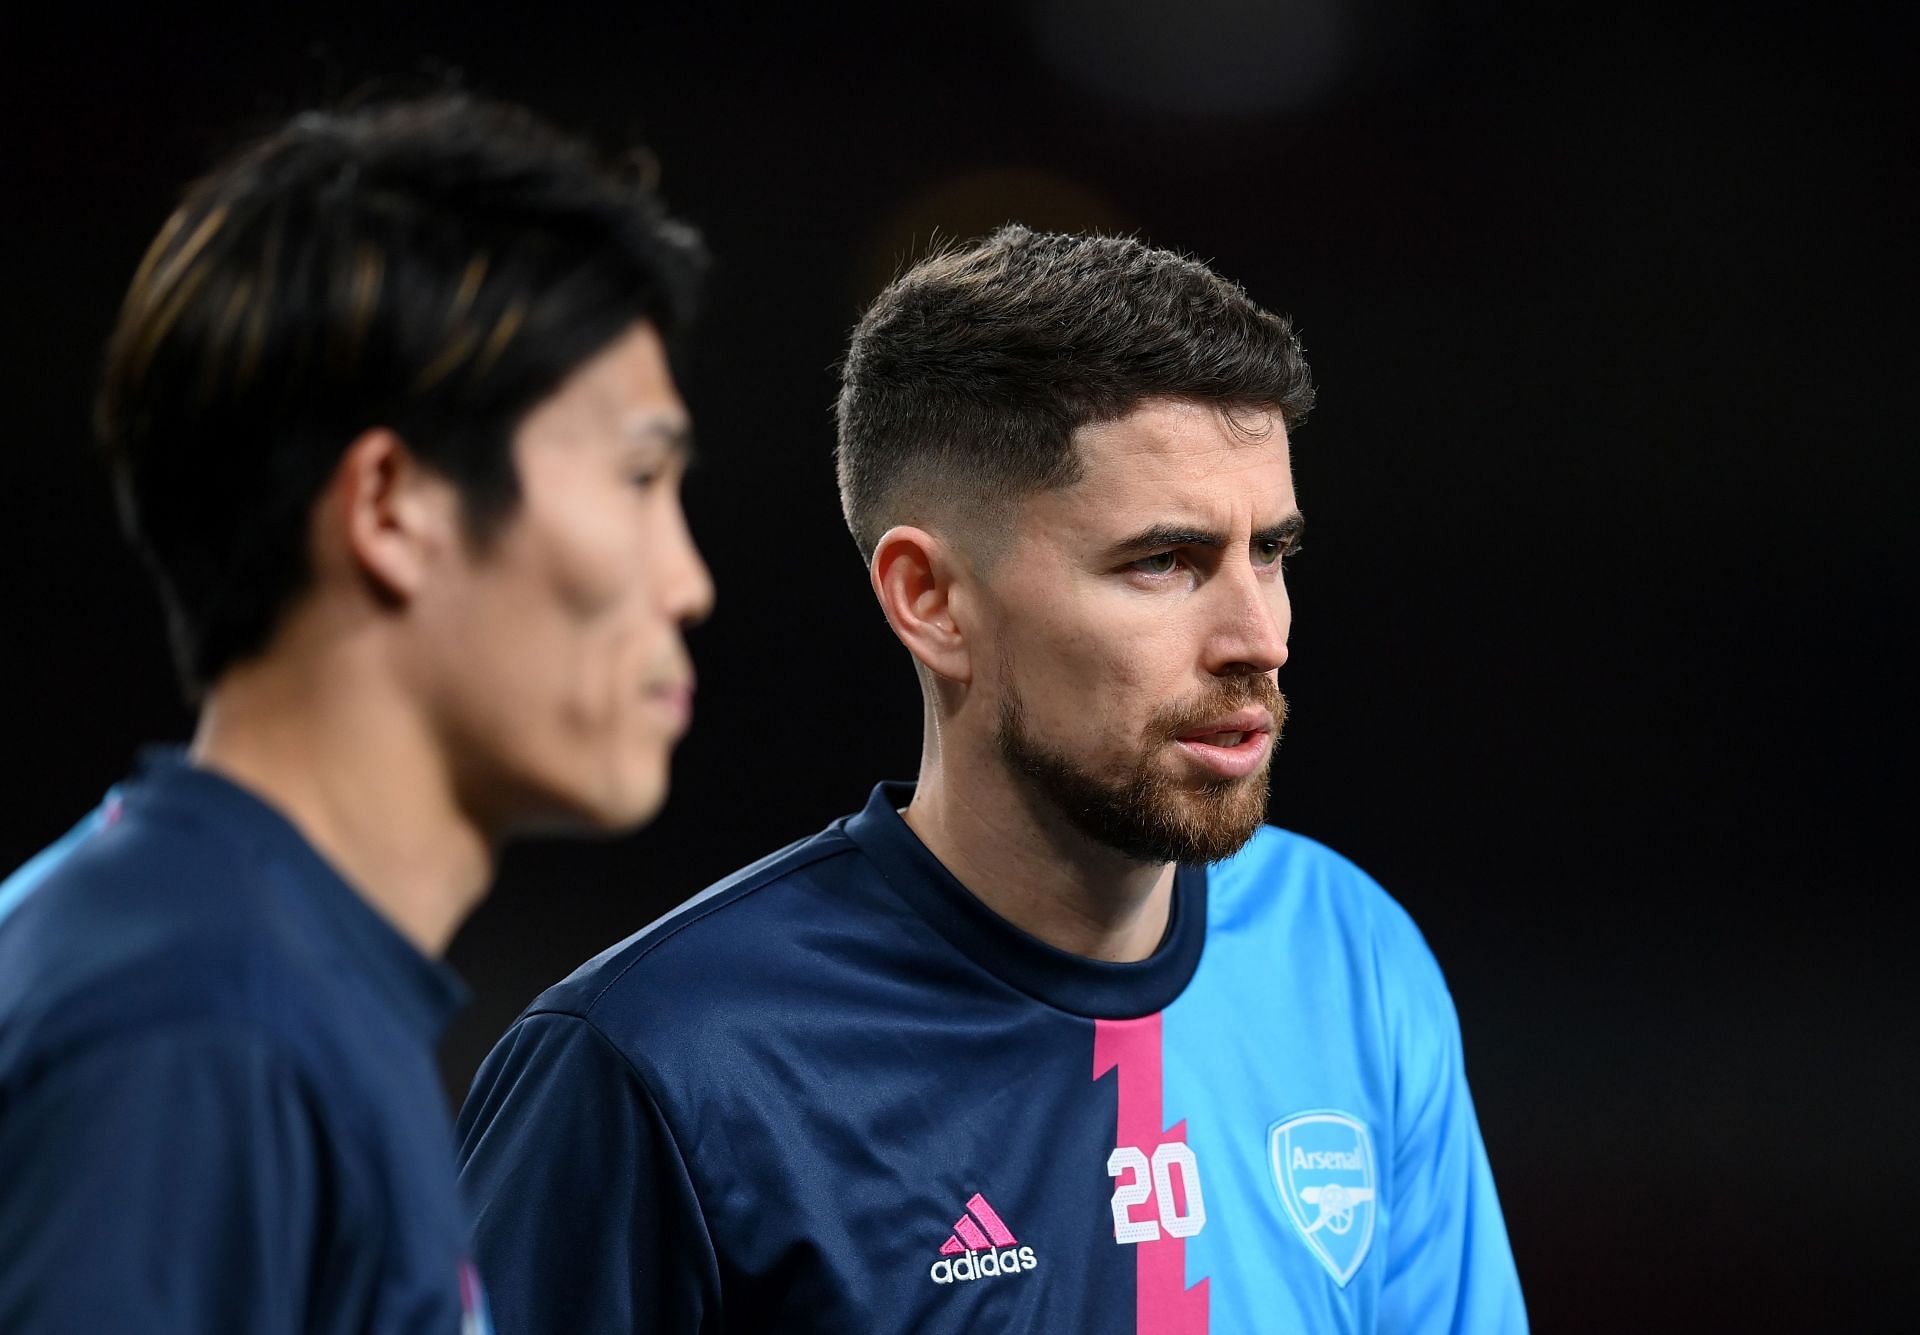 Jorginho (right) arrived at the Emirates in January